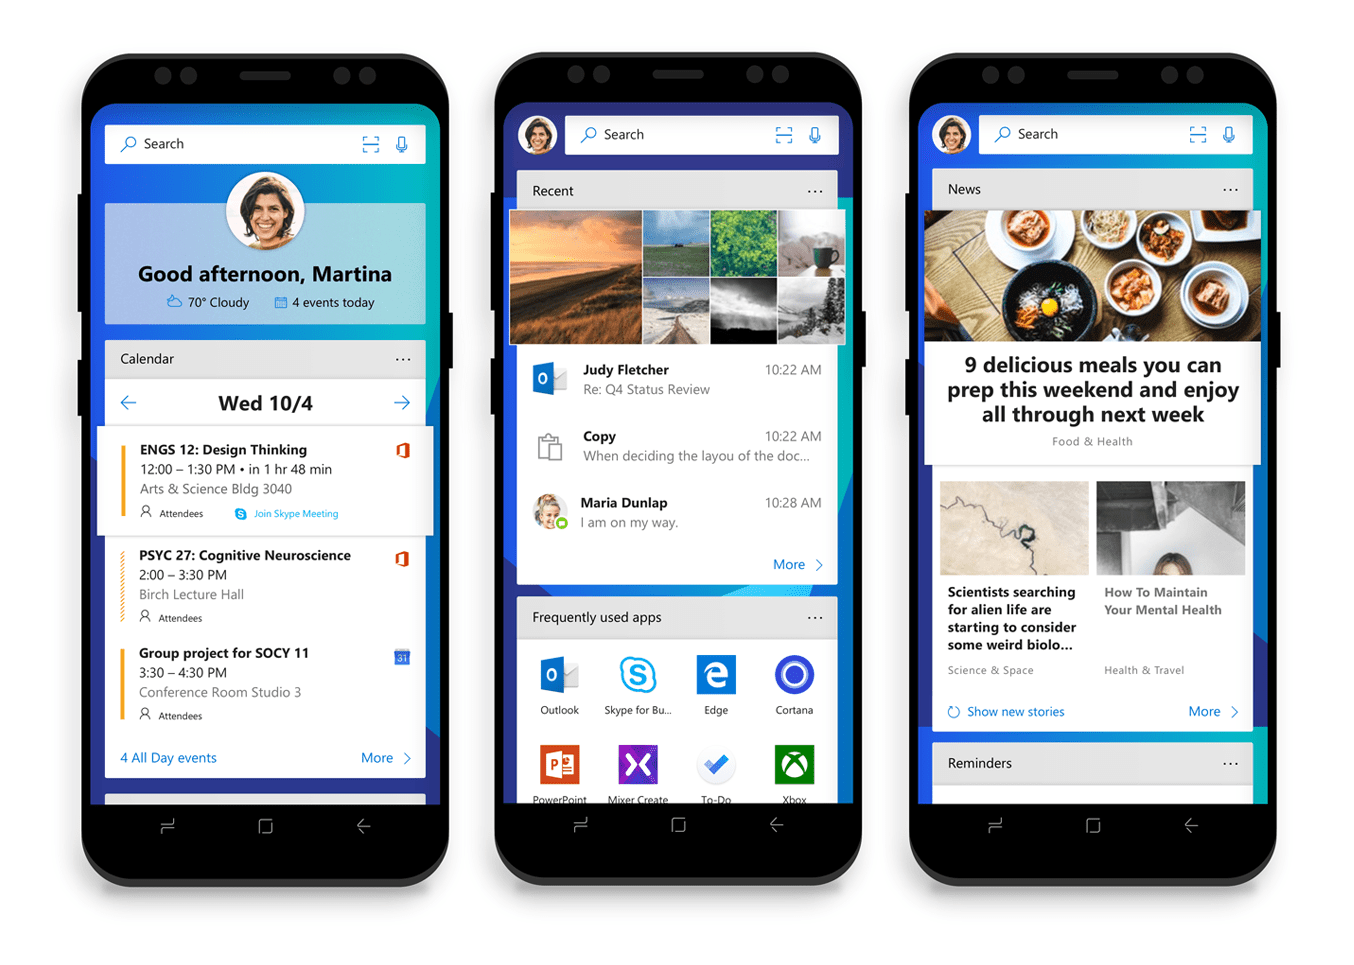 Microsoft Launcher Preview for Android released: that's new